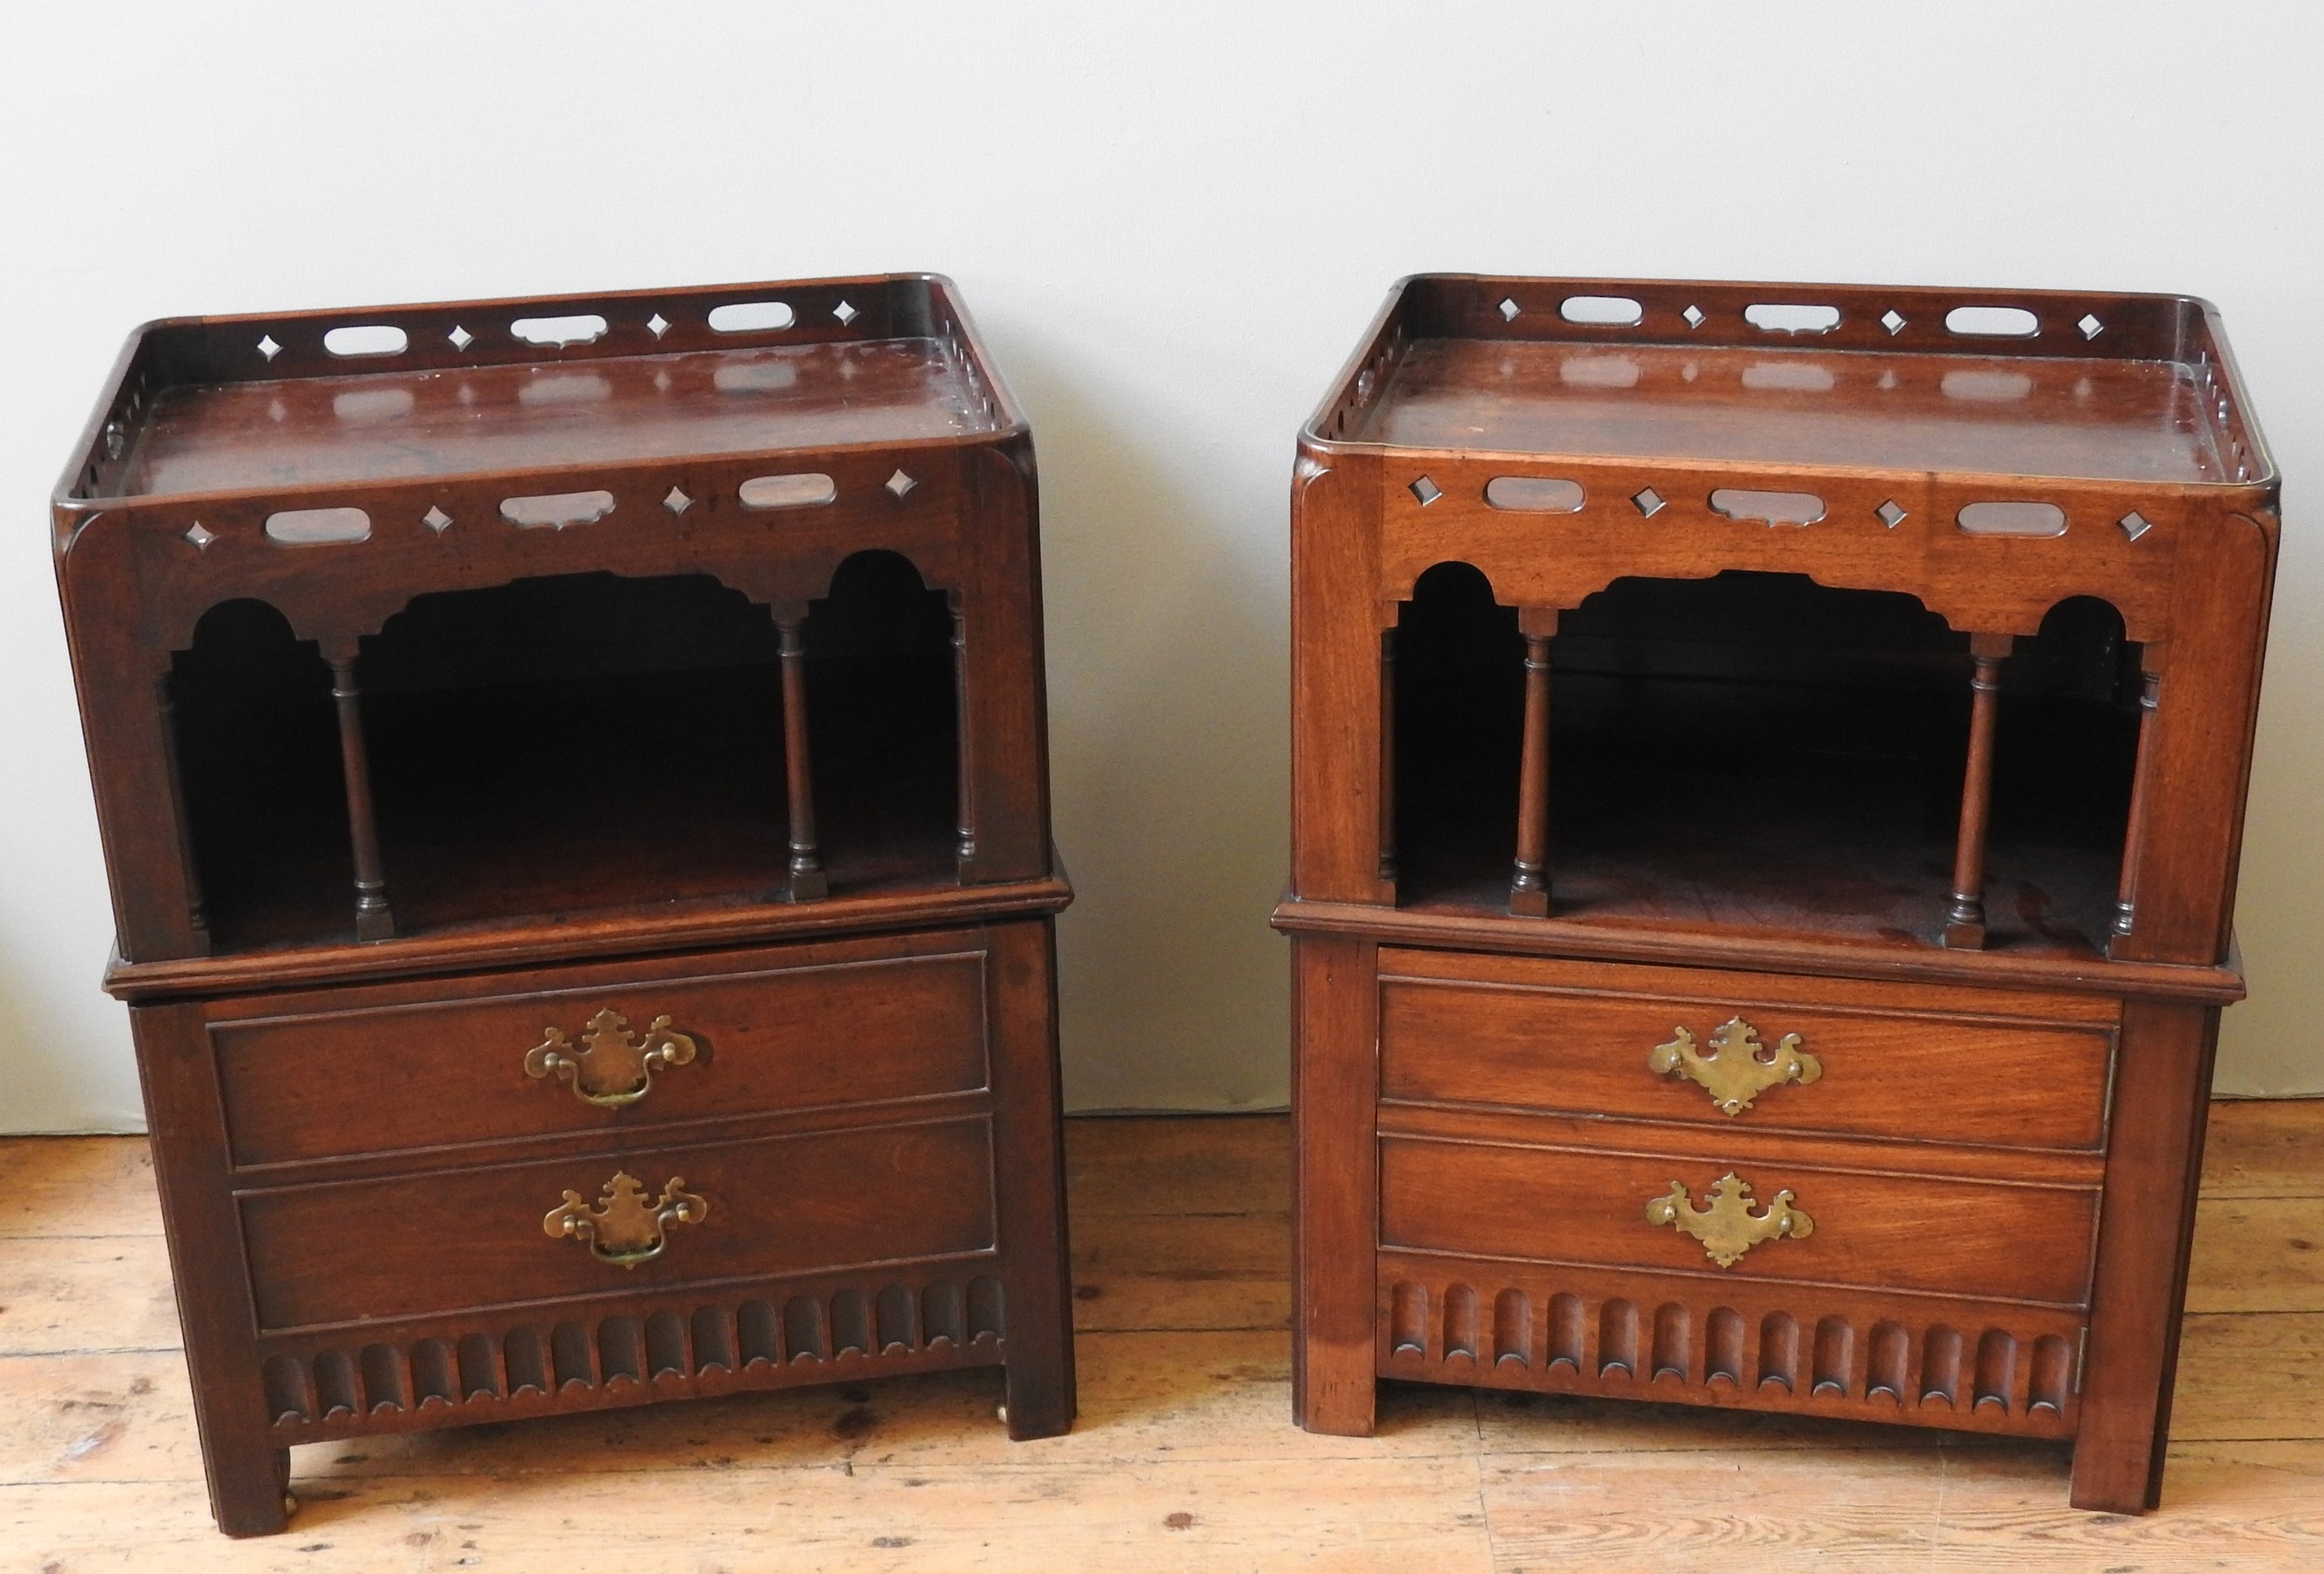 AN UNUSUAL NEAR PAIR OF GEORGE III MAHOGANY NIGHT COMMODES, CIRCA 1780, both adapted as bedside